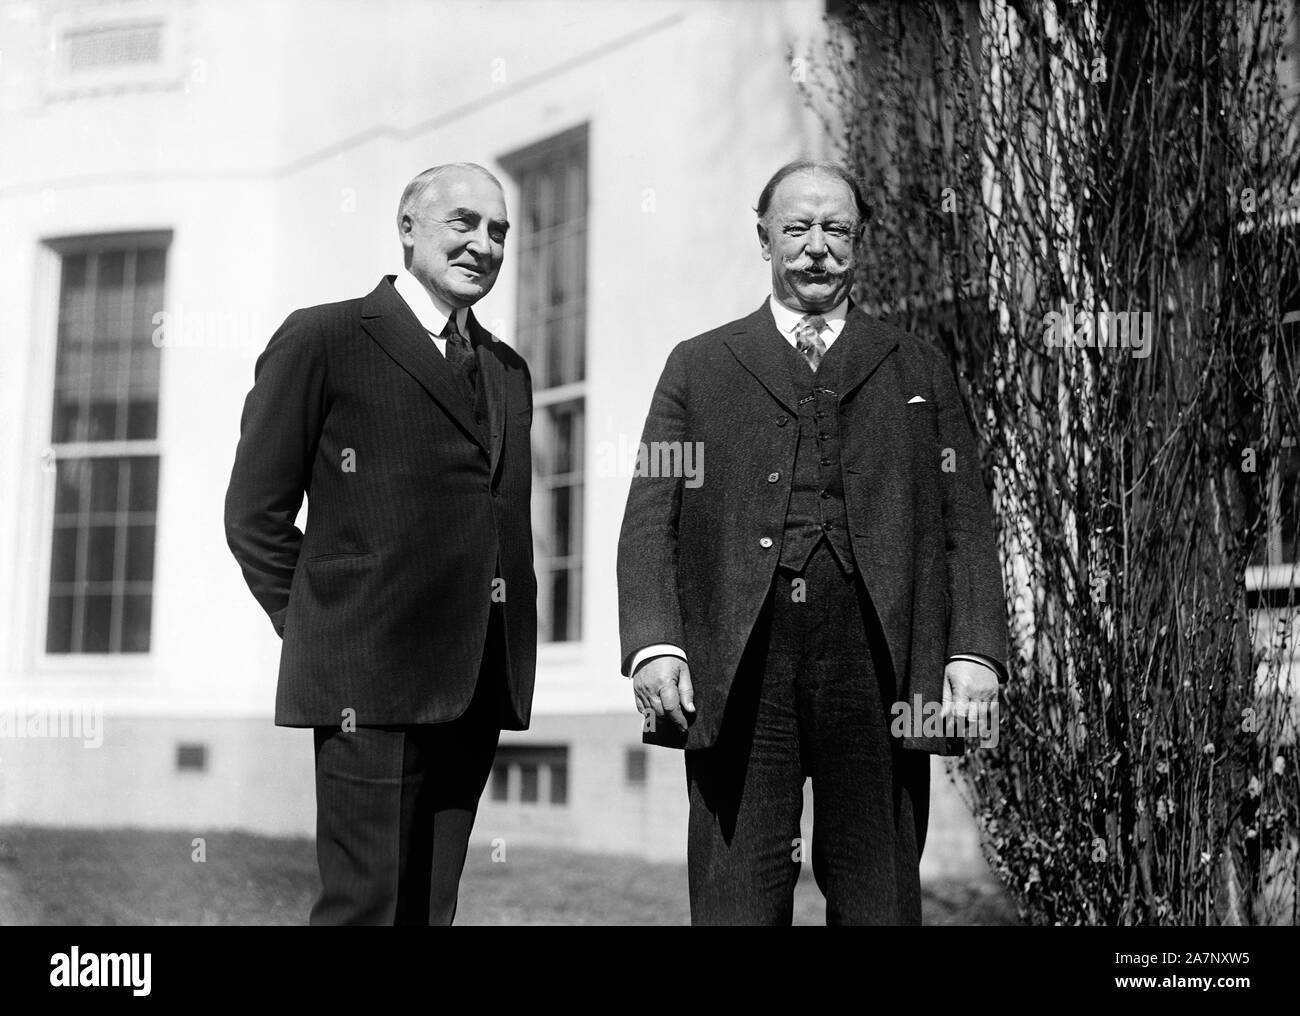 U.S. President Warren G. Harding and Former President William Howard Taft at the White House, following the death of Chief Justice Edward Douglass White, Harding nominated Taft to be Chief Justice, Washington, D.C., USA, Photograph by Harris & Ewing, 1921 Stock Photo